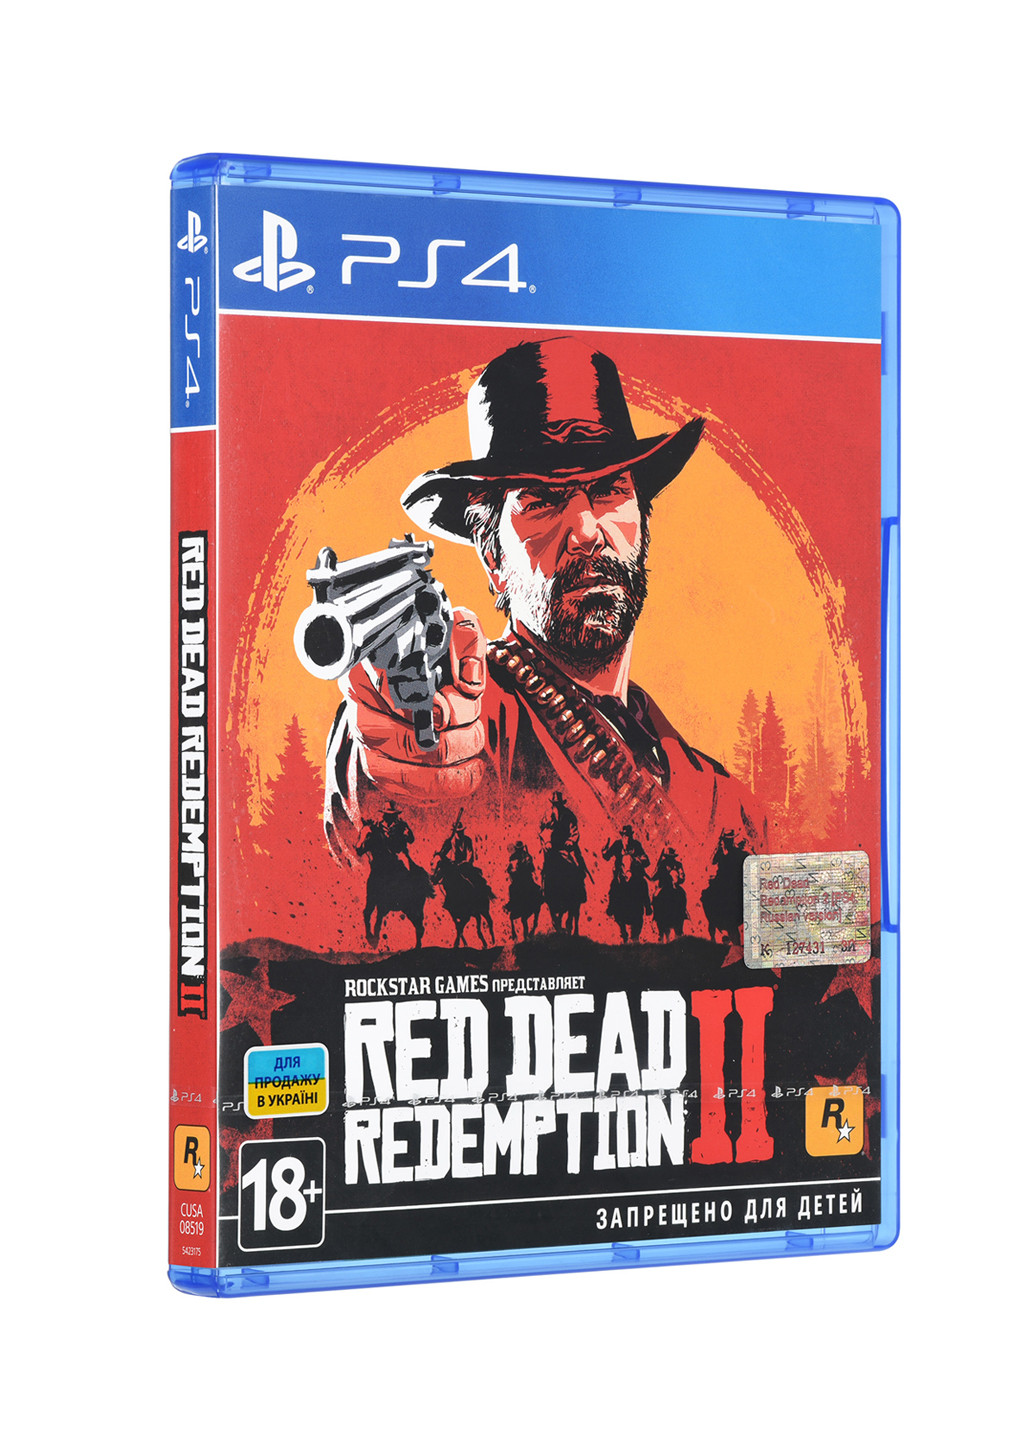 Гра PS4 Red Dead Redemption 2 [Blu-Ray диск] Games Software игра ps4 red dead redemption 2 [blu-ray диск] (150134268)